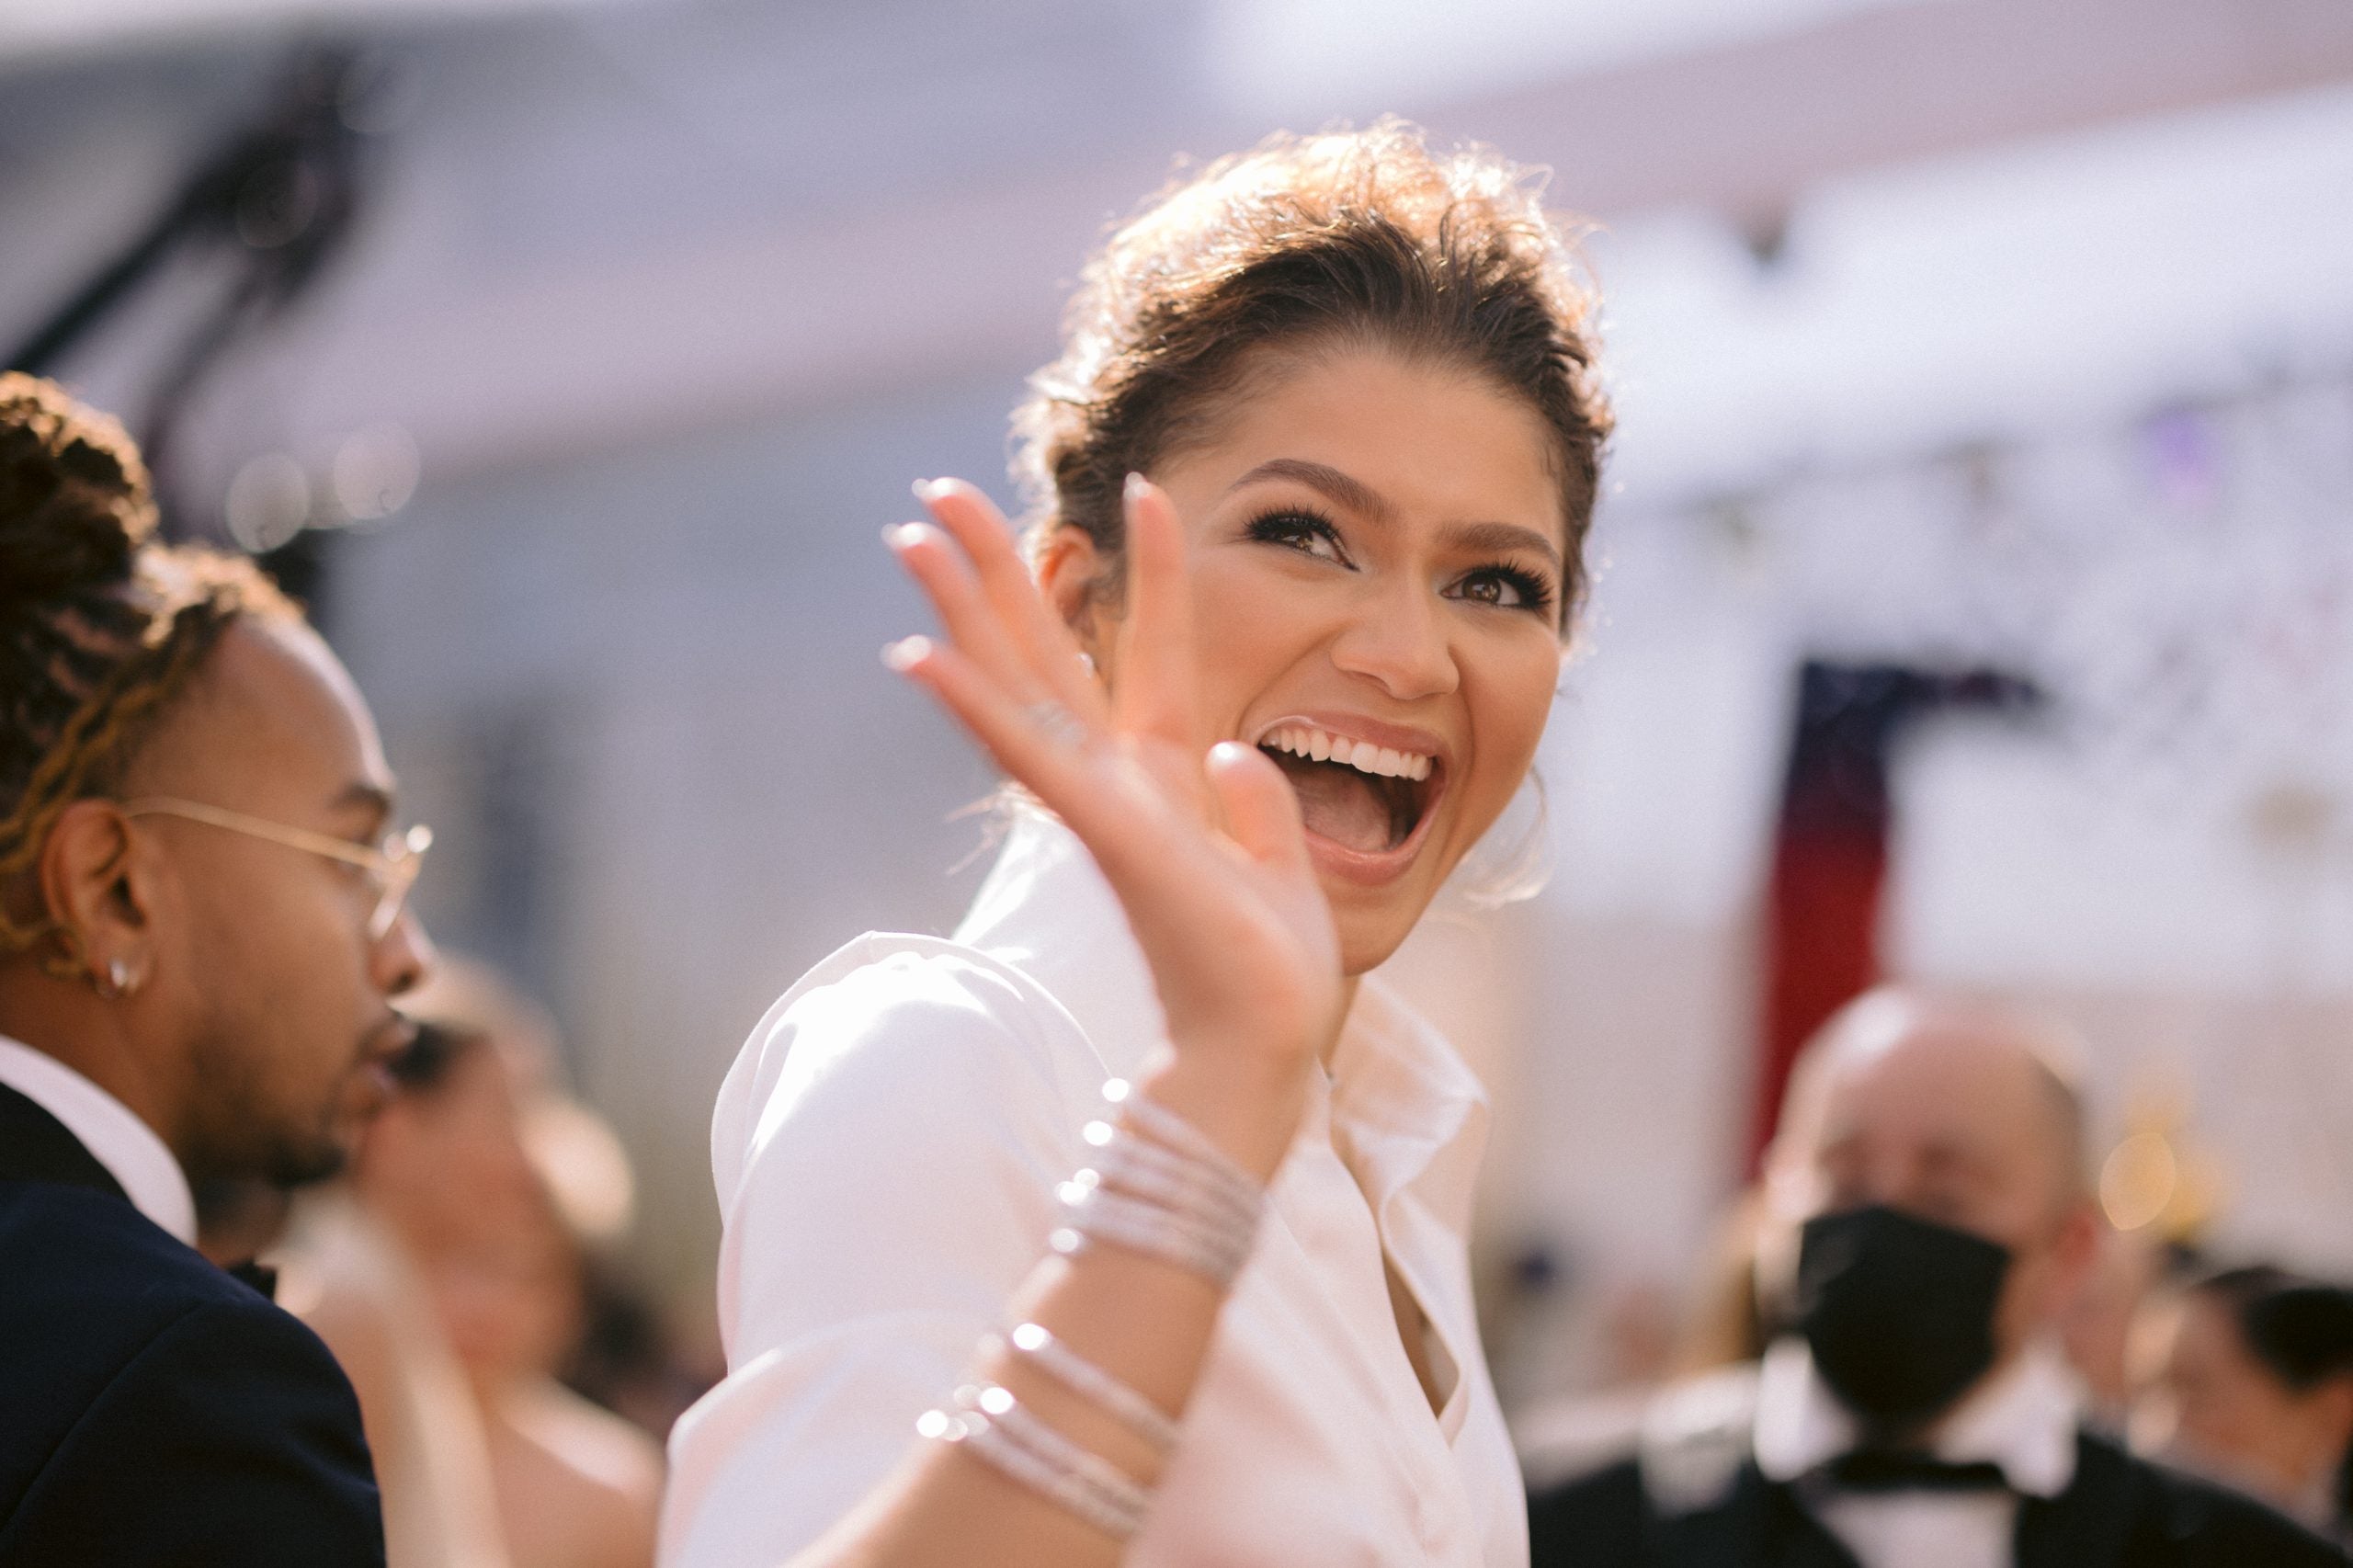 Zendaya Promises To 'Never' Cook Again After Kitchen Mishap Lands Her In The Hospital